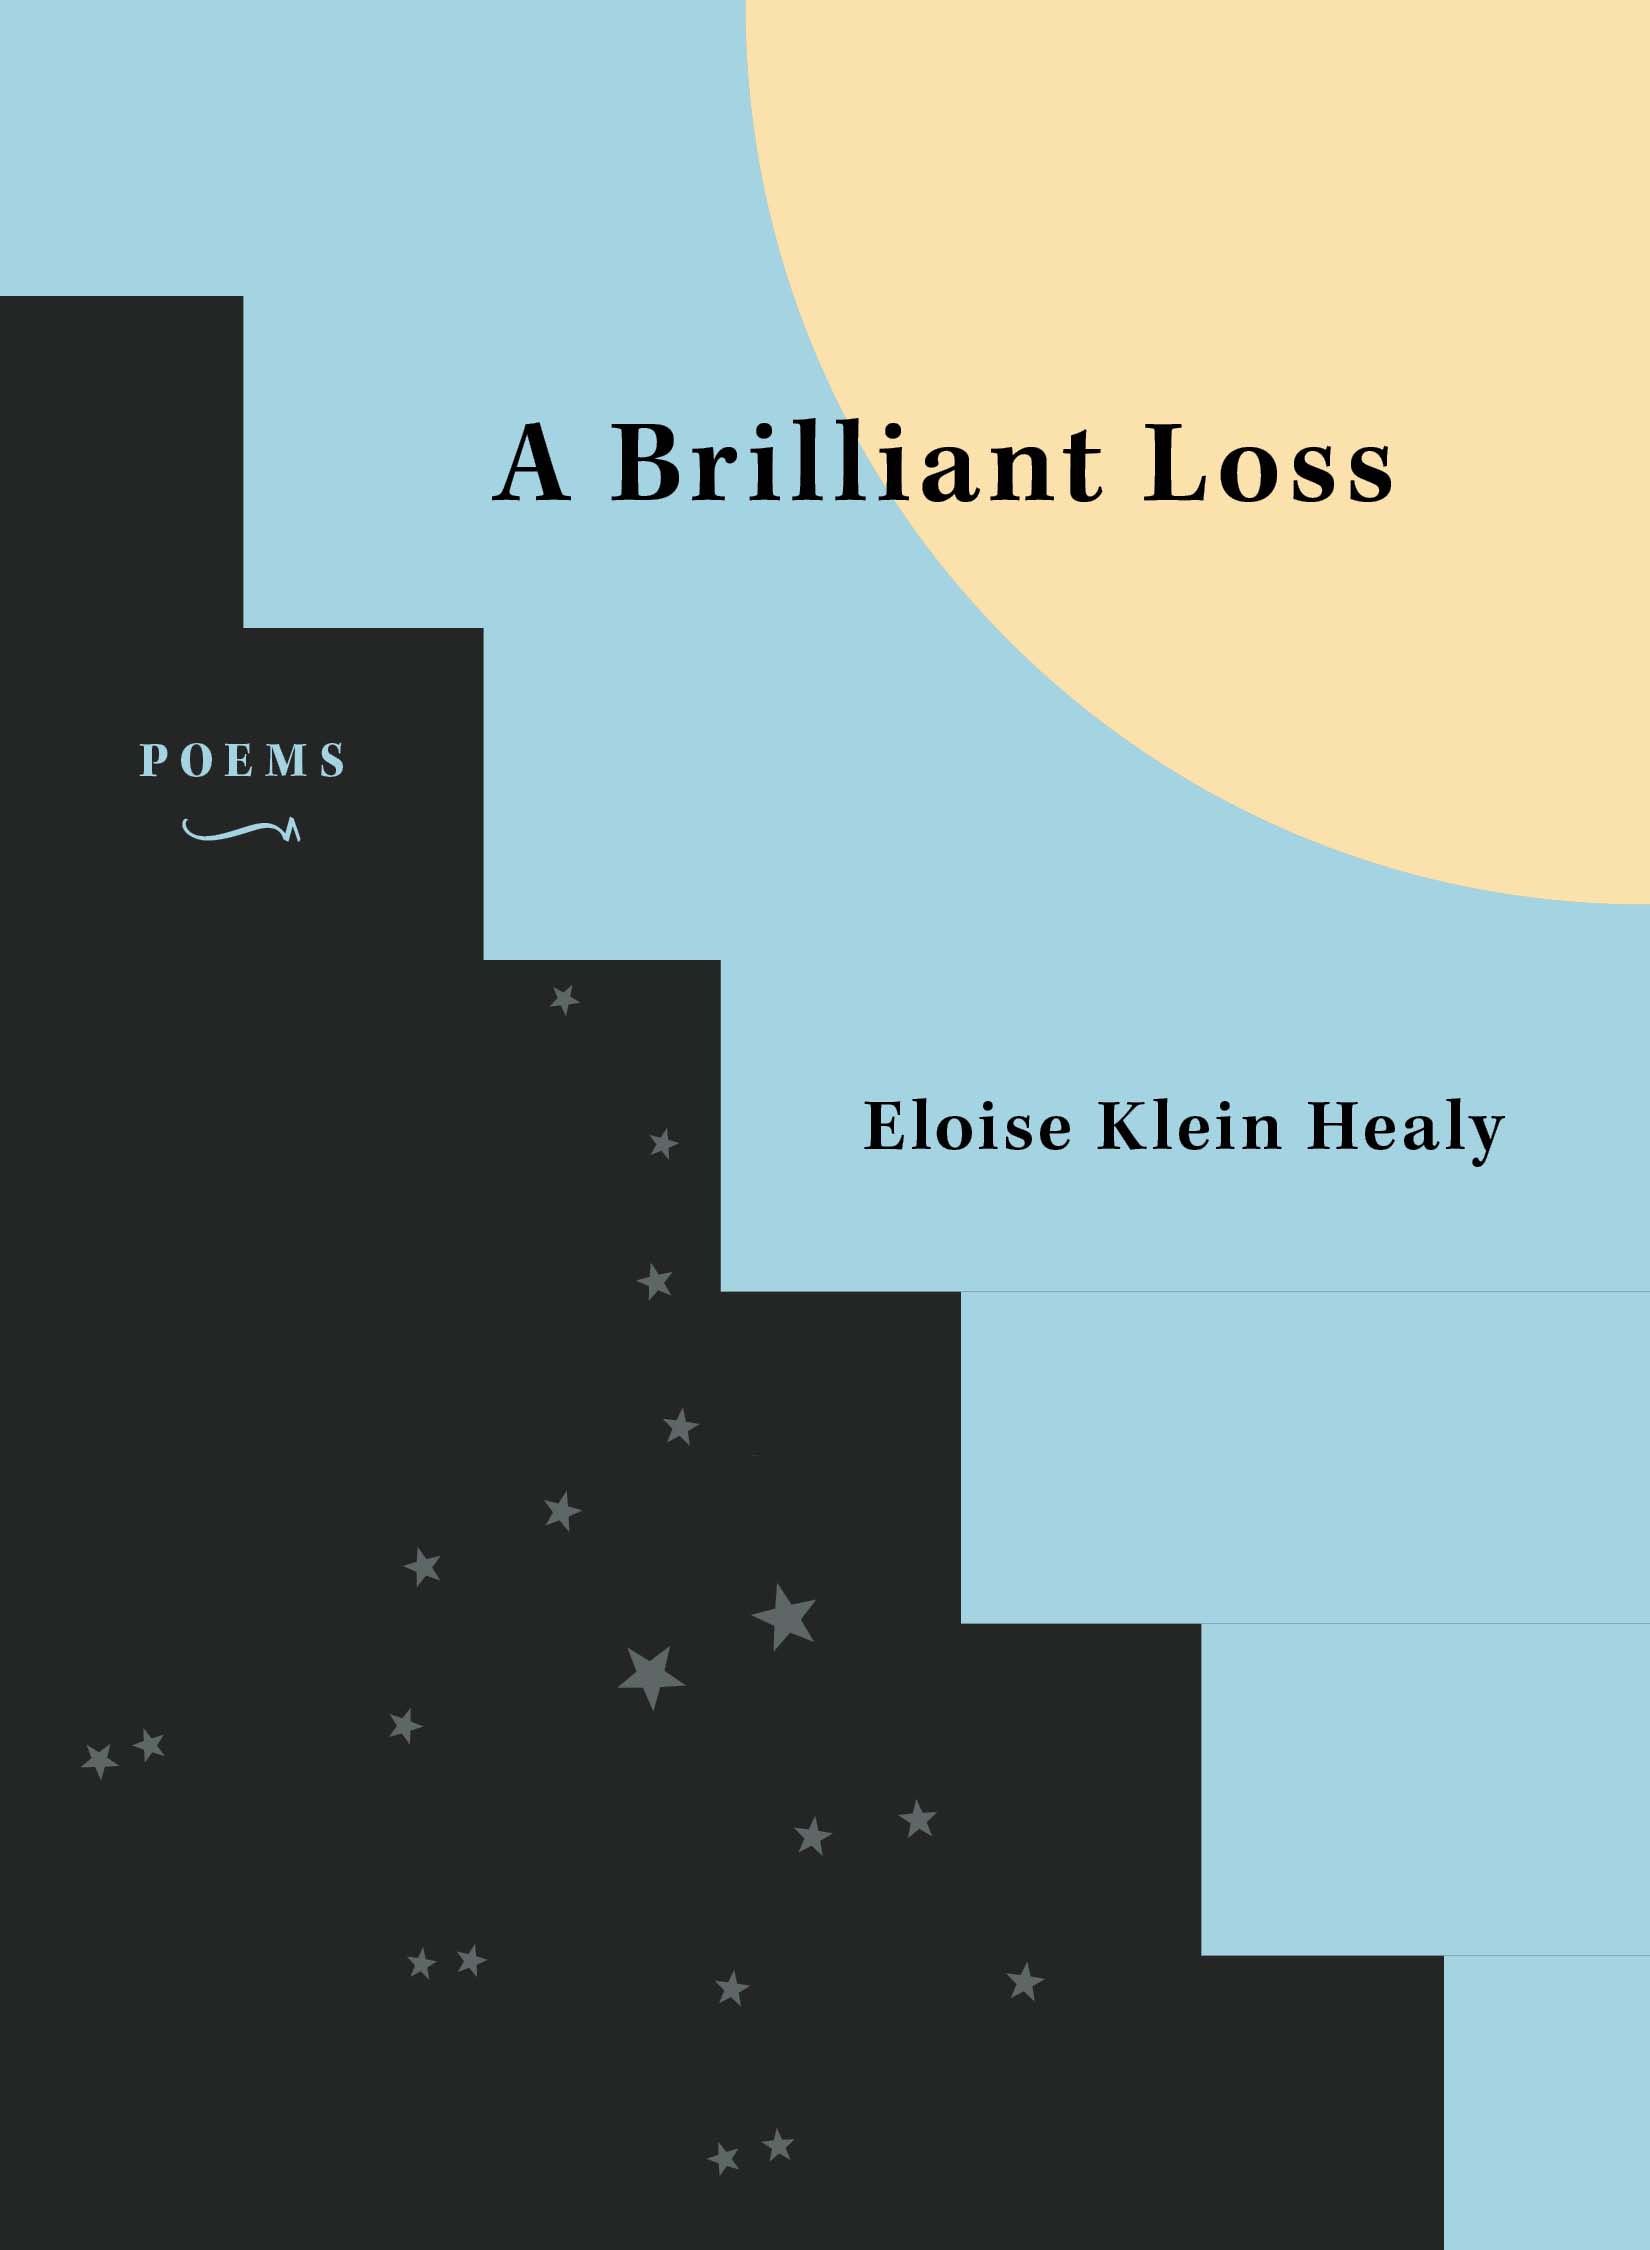 A light blue background with a black outline of a staircase with a yellow circle, text reads "A Brilliant Loss" and "Eloise Klein Healy"